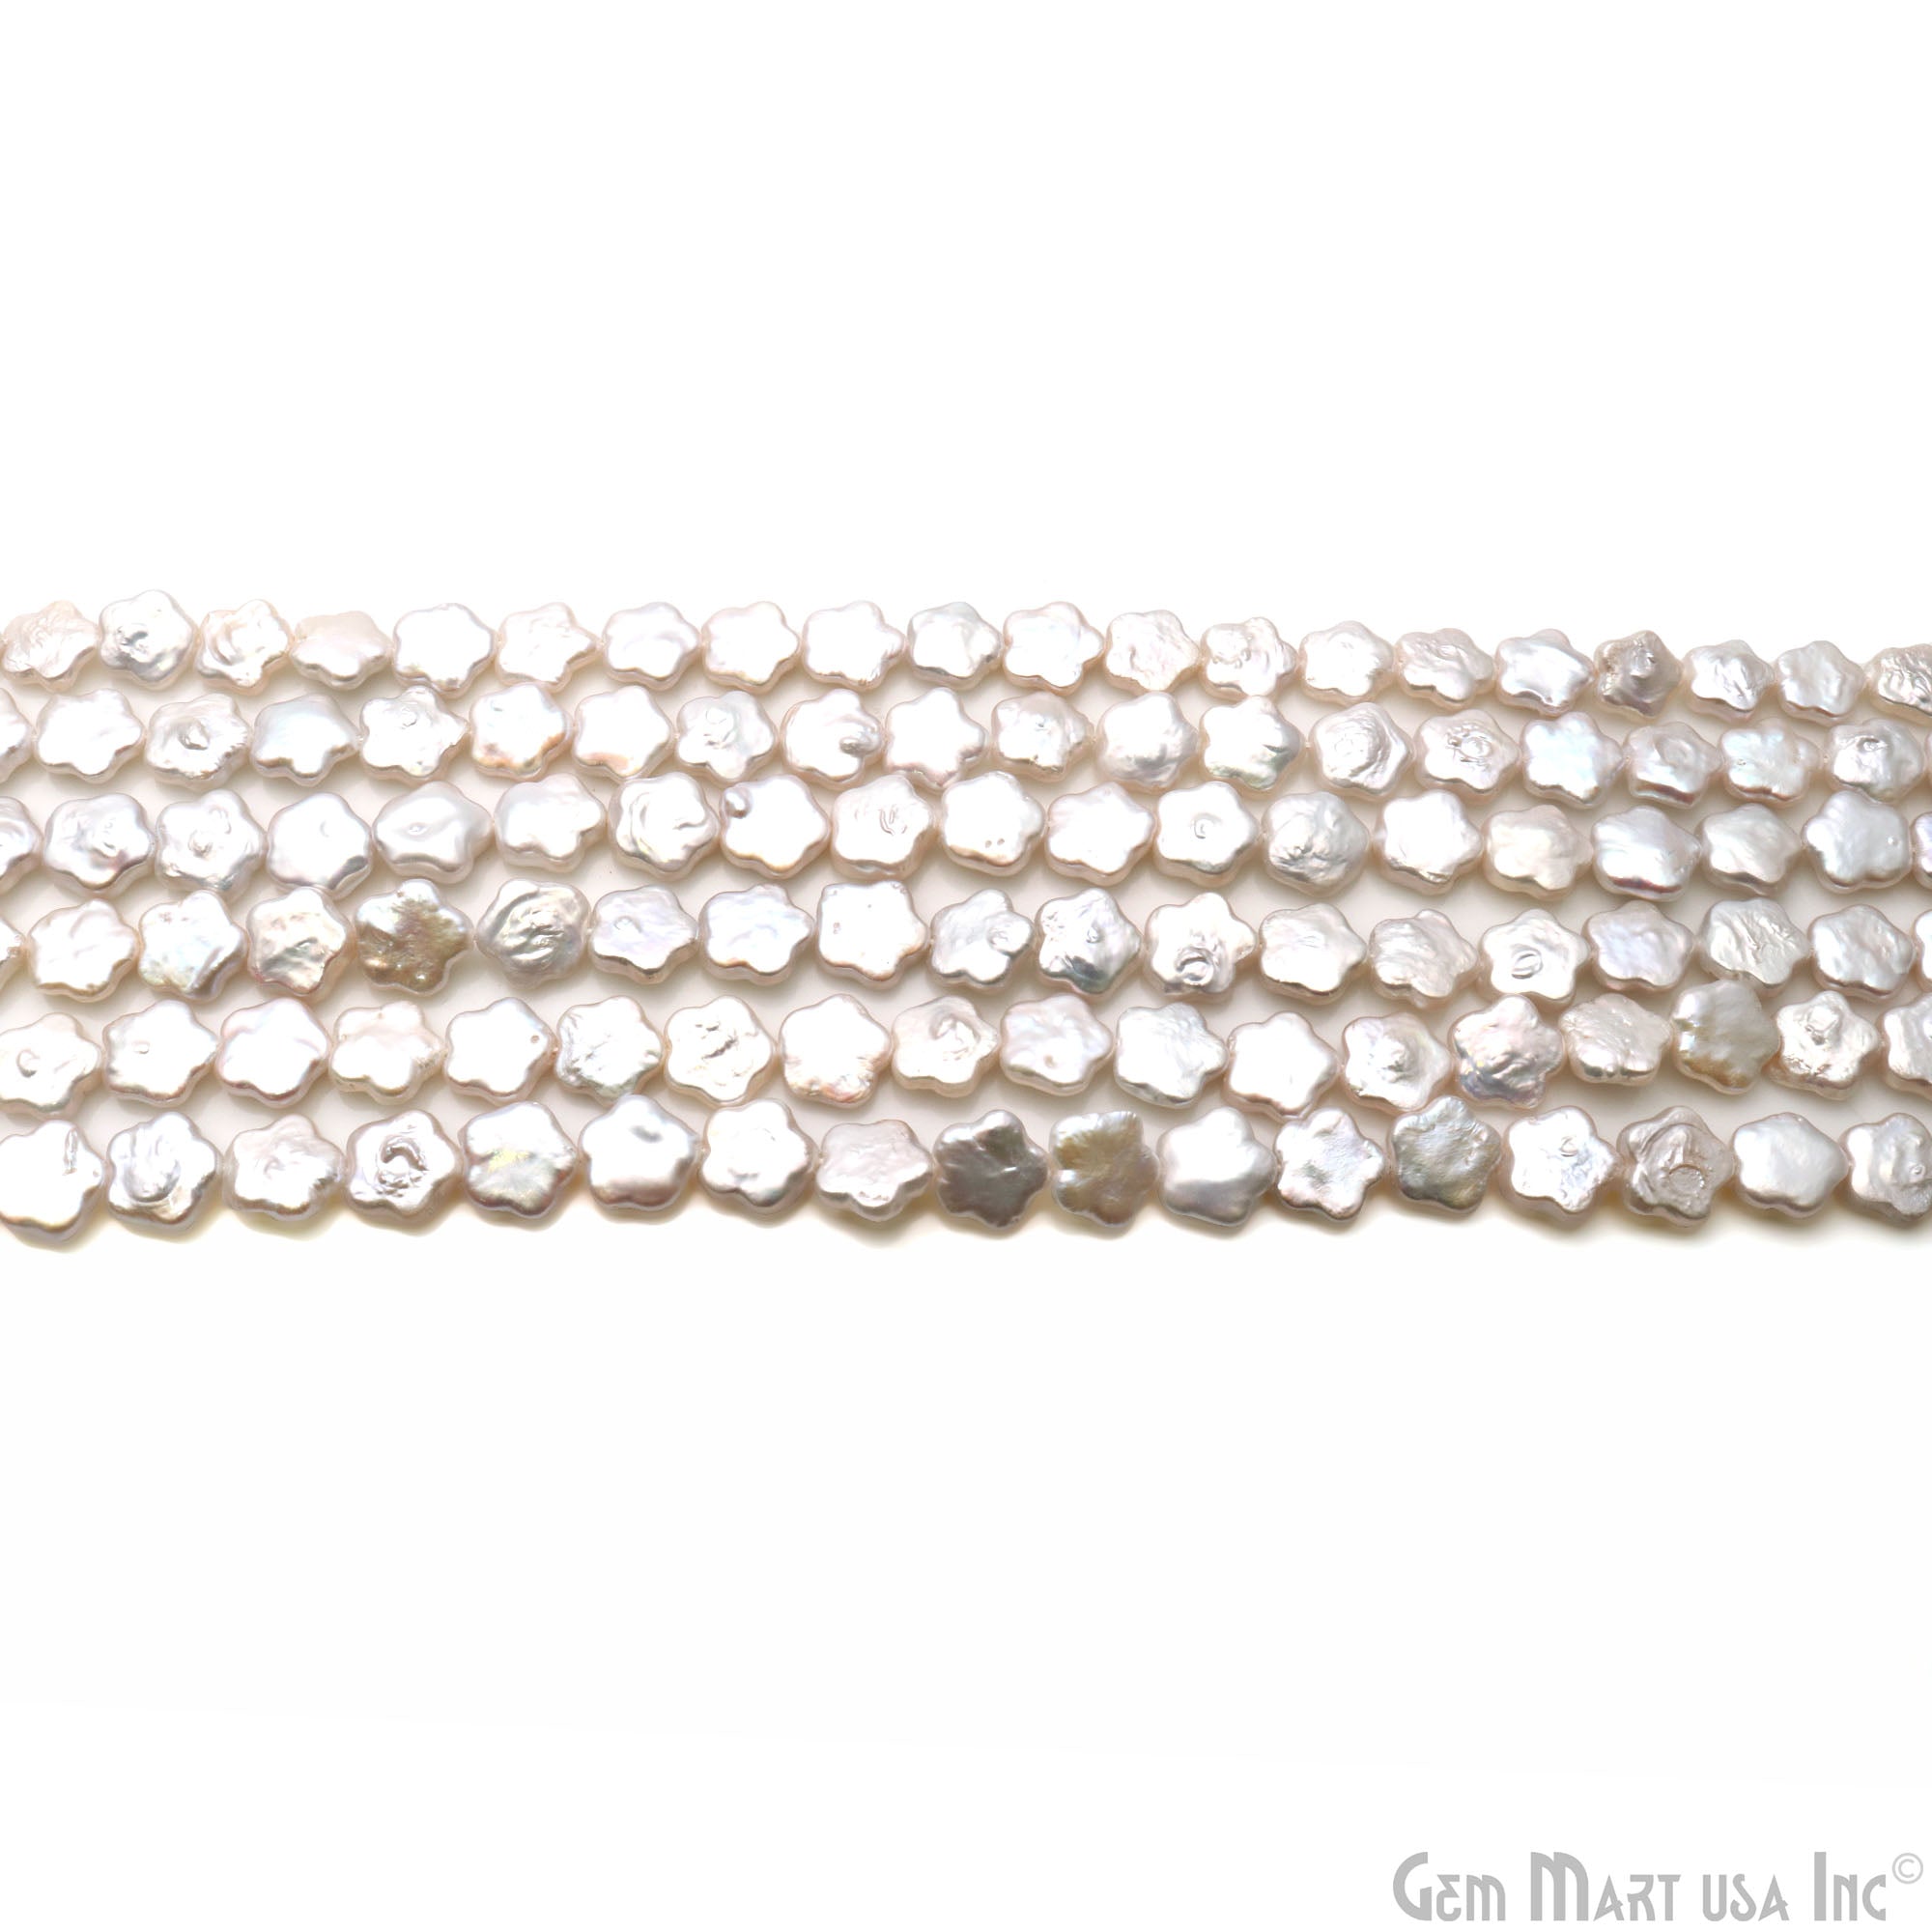 Pearl Free Form 10mm Beads Strand 16" (42 Beads)